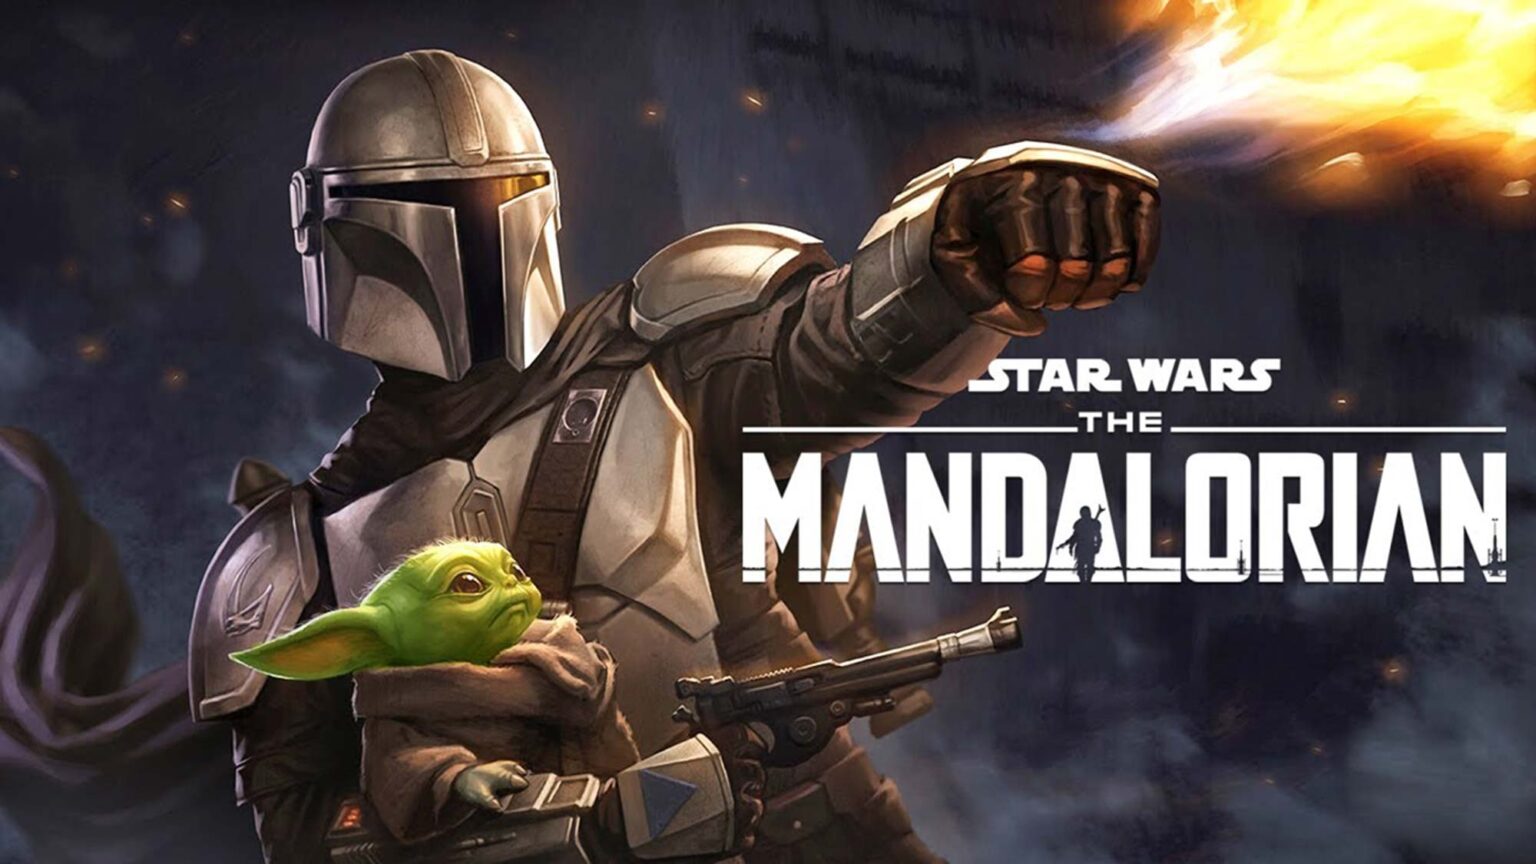 The mighty collection of Star Wars content out there has frequently jumped around on the Star Wars timeline. Here's where 'The Mandalorian' fits.